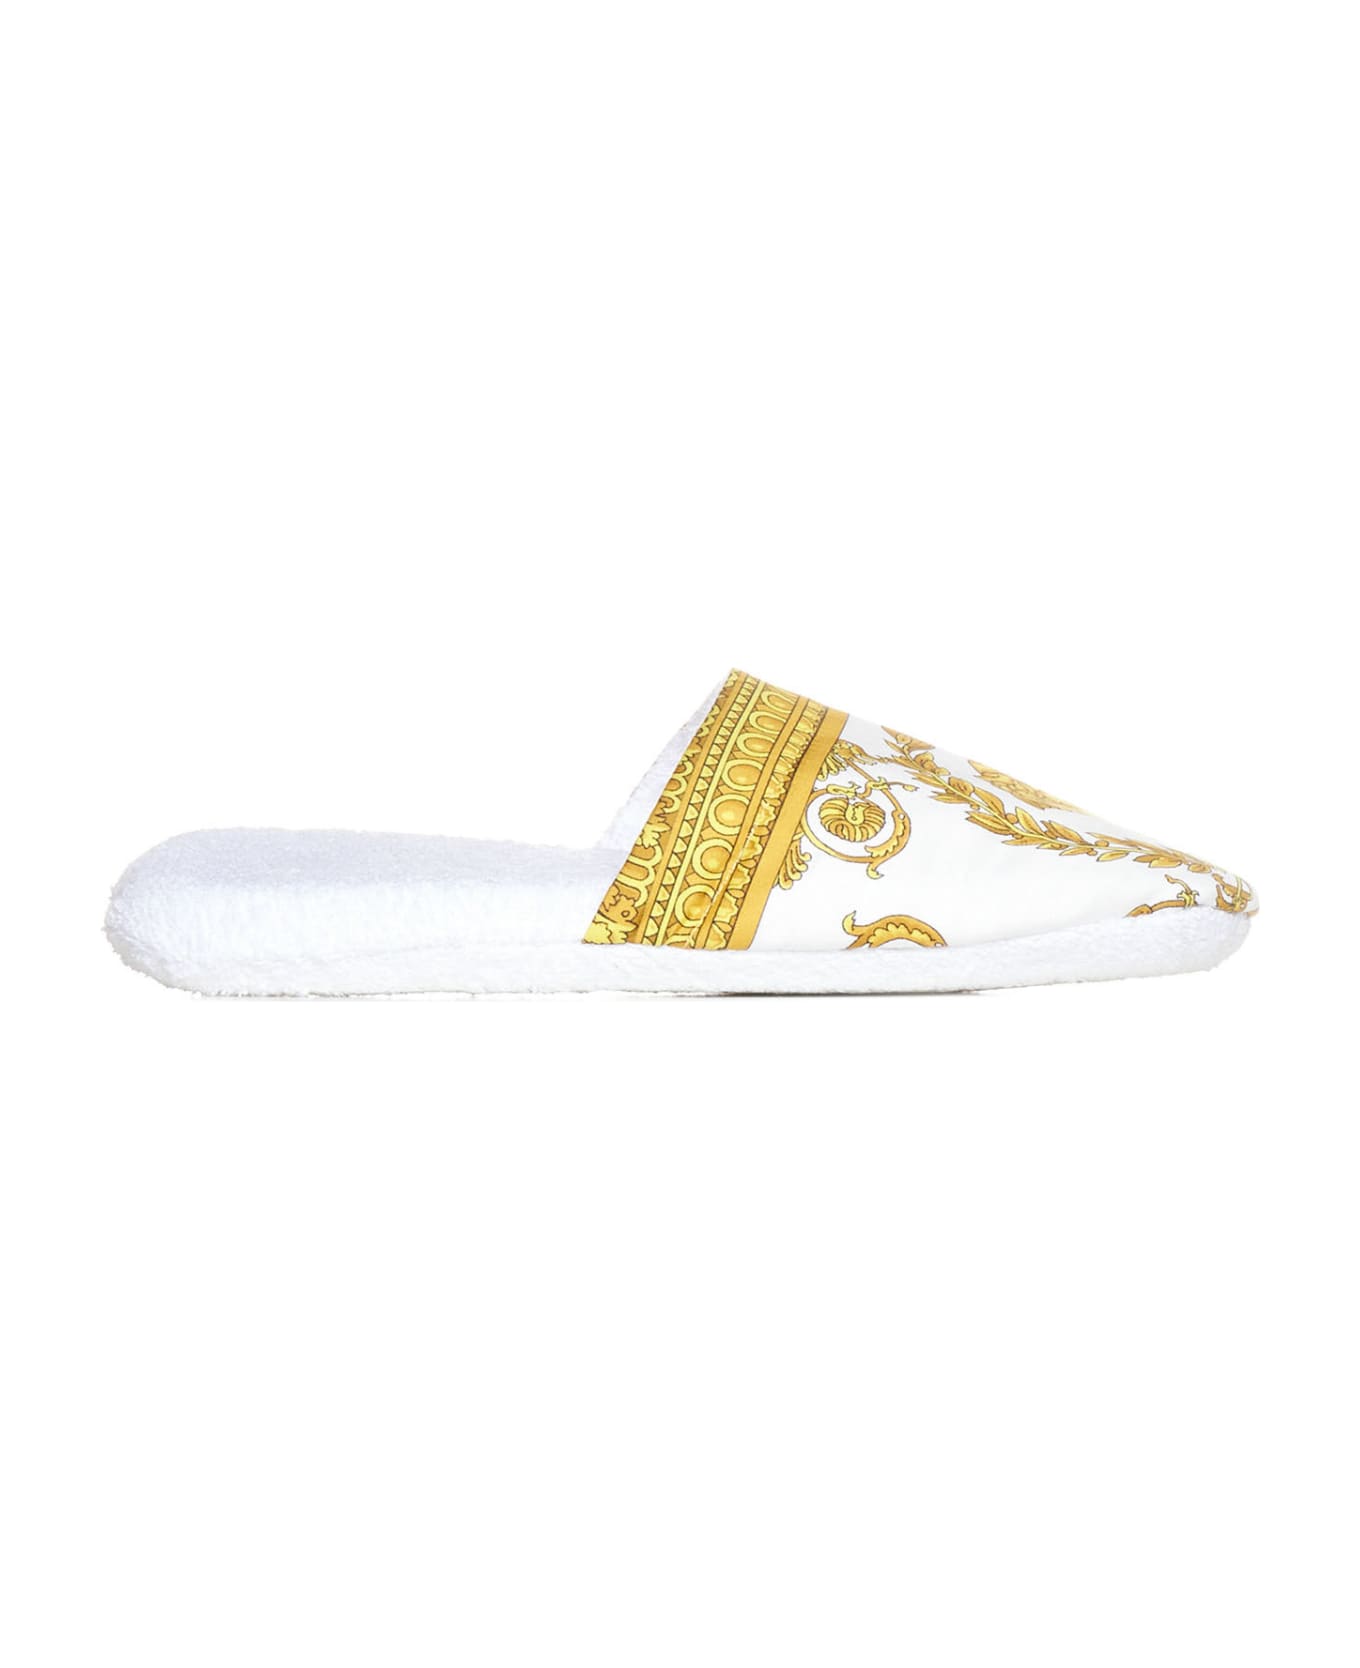 Versace lightweight Shoes - White